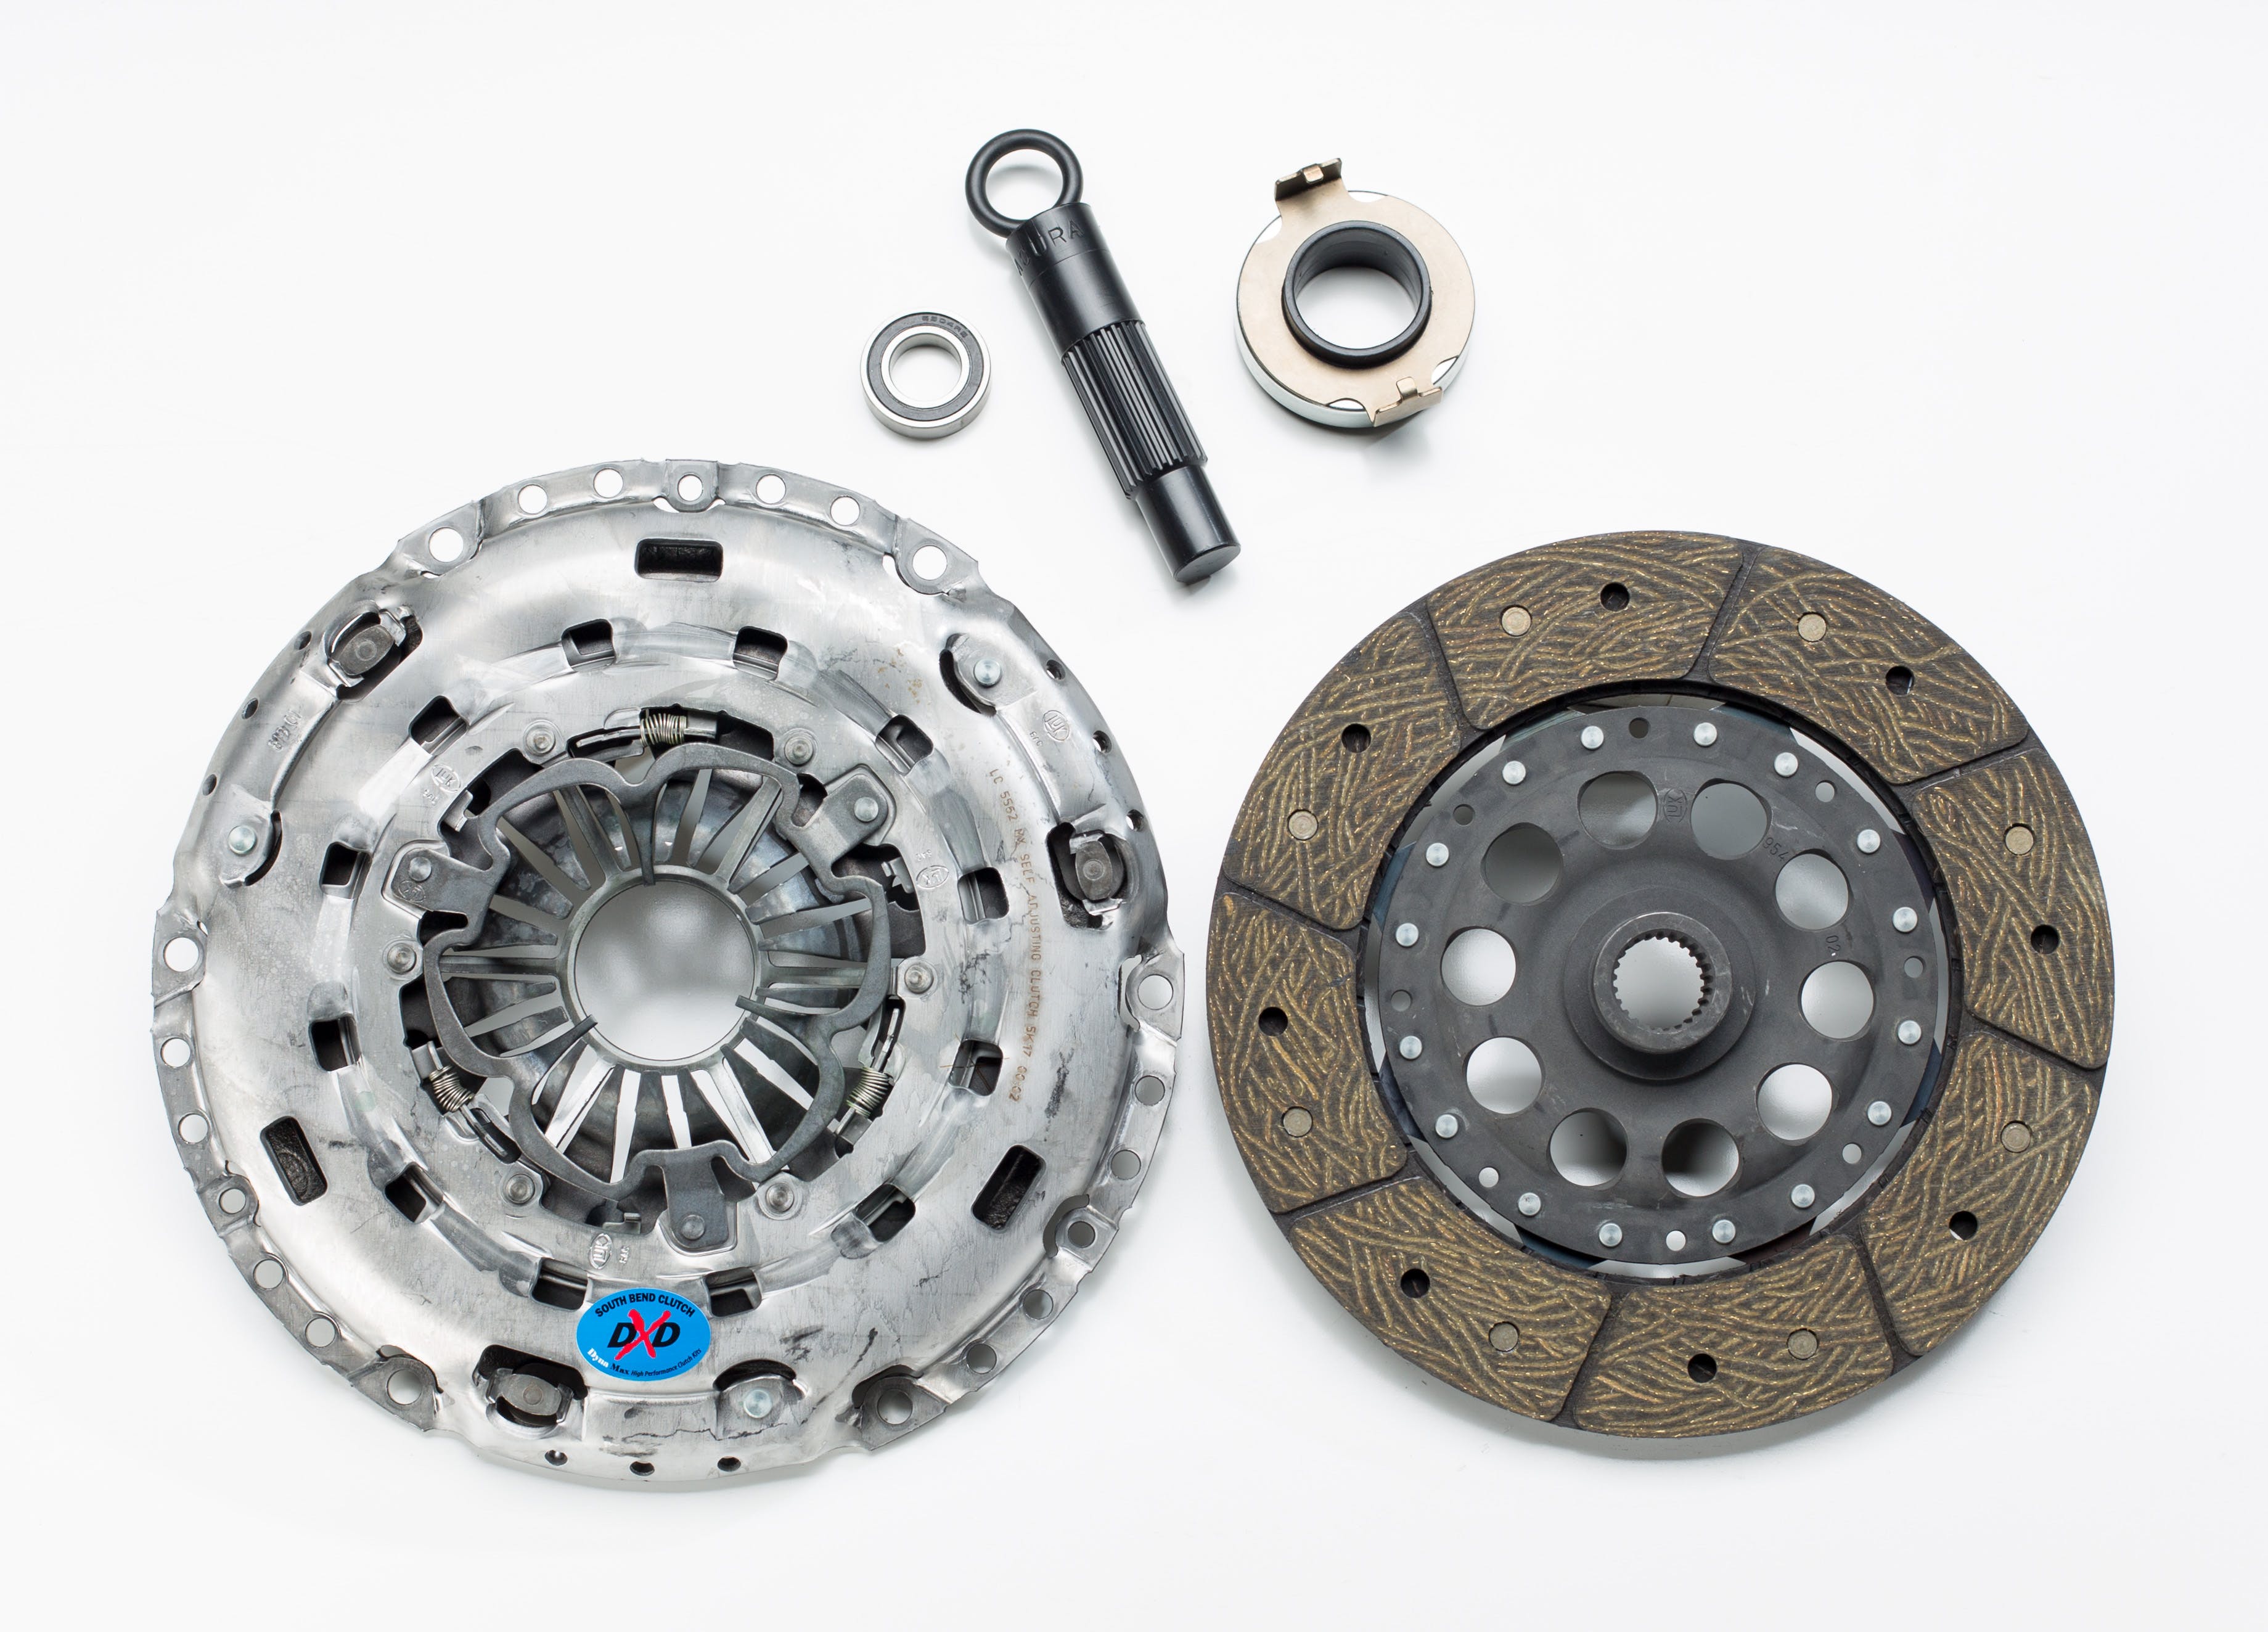 South Bend Clutch HCK1007-HD-O Stage 2 Daily Clutch Kit